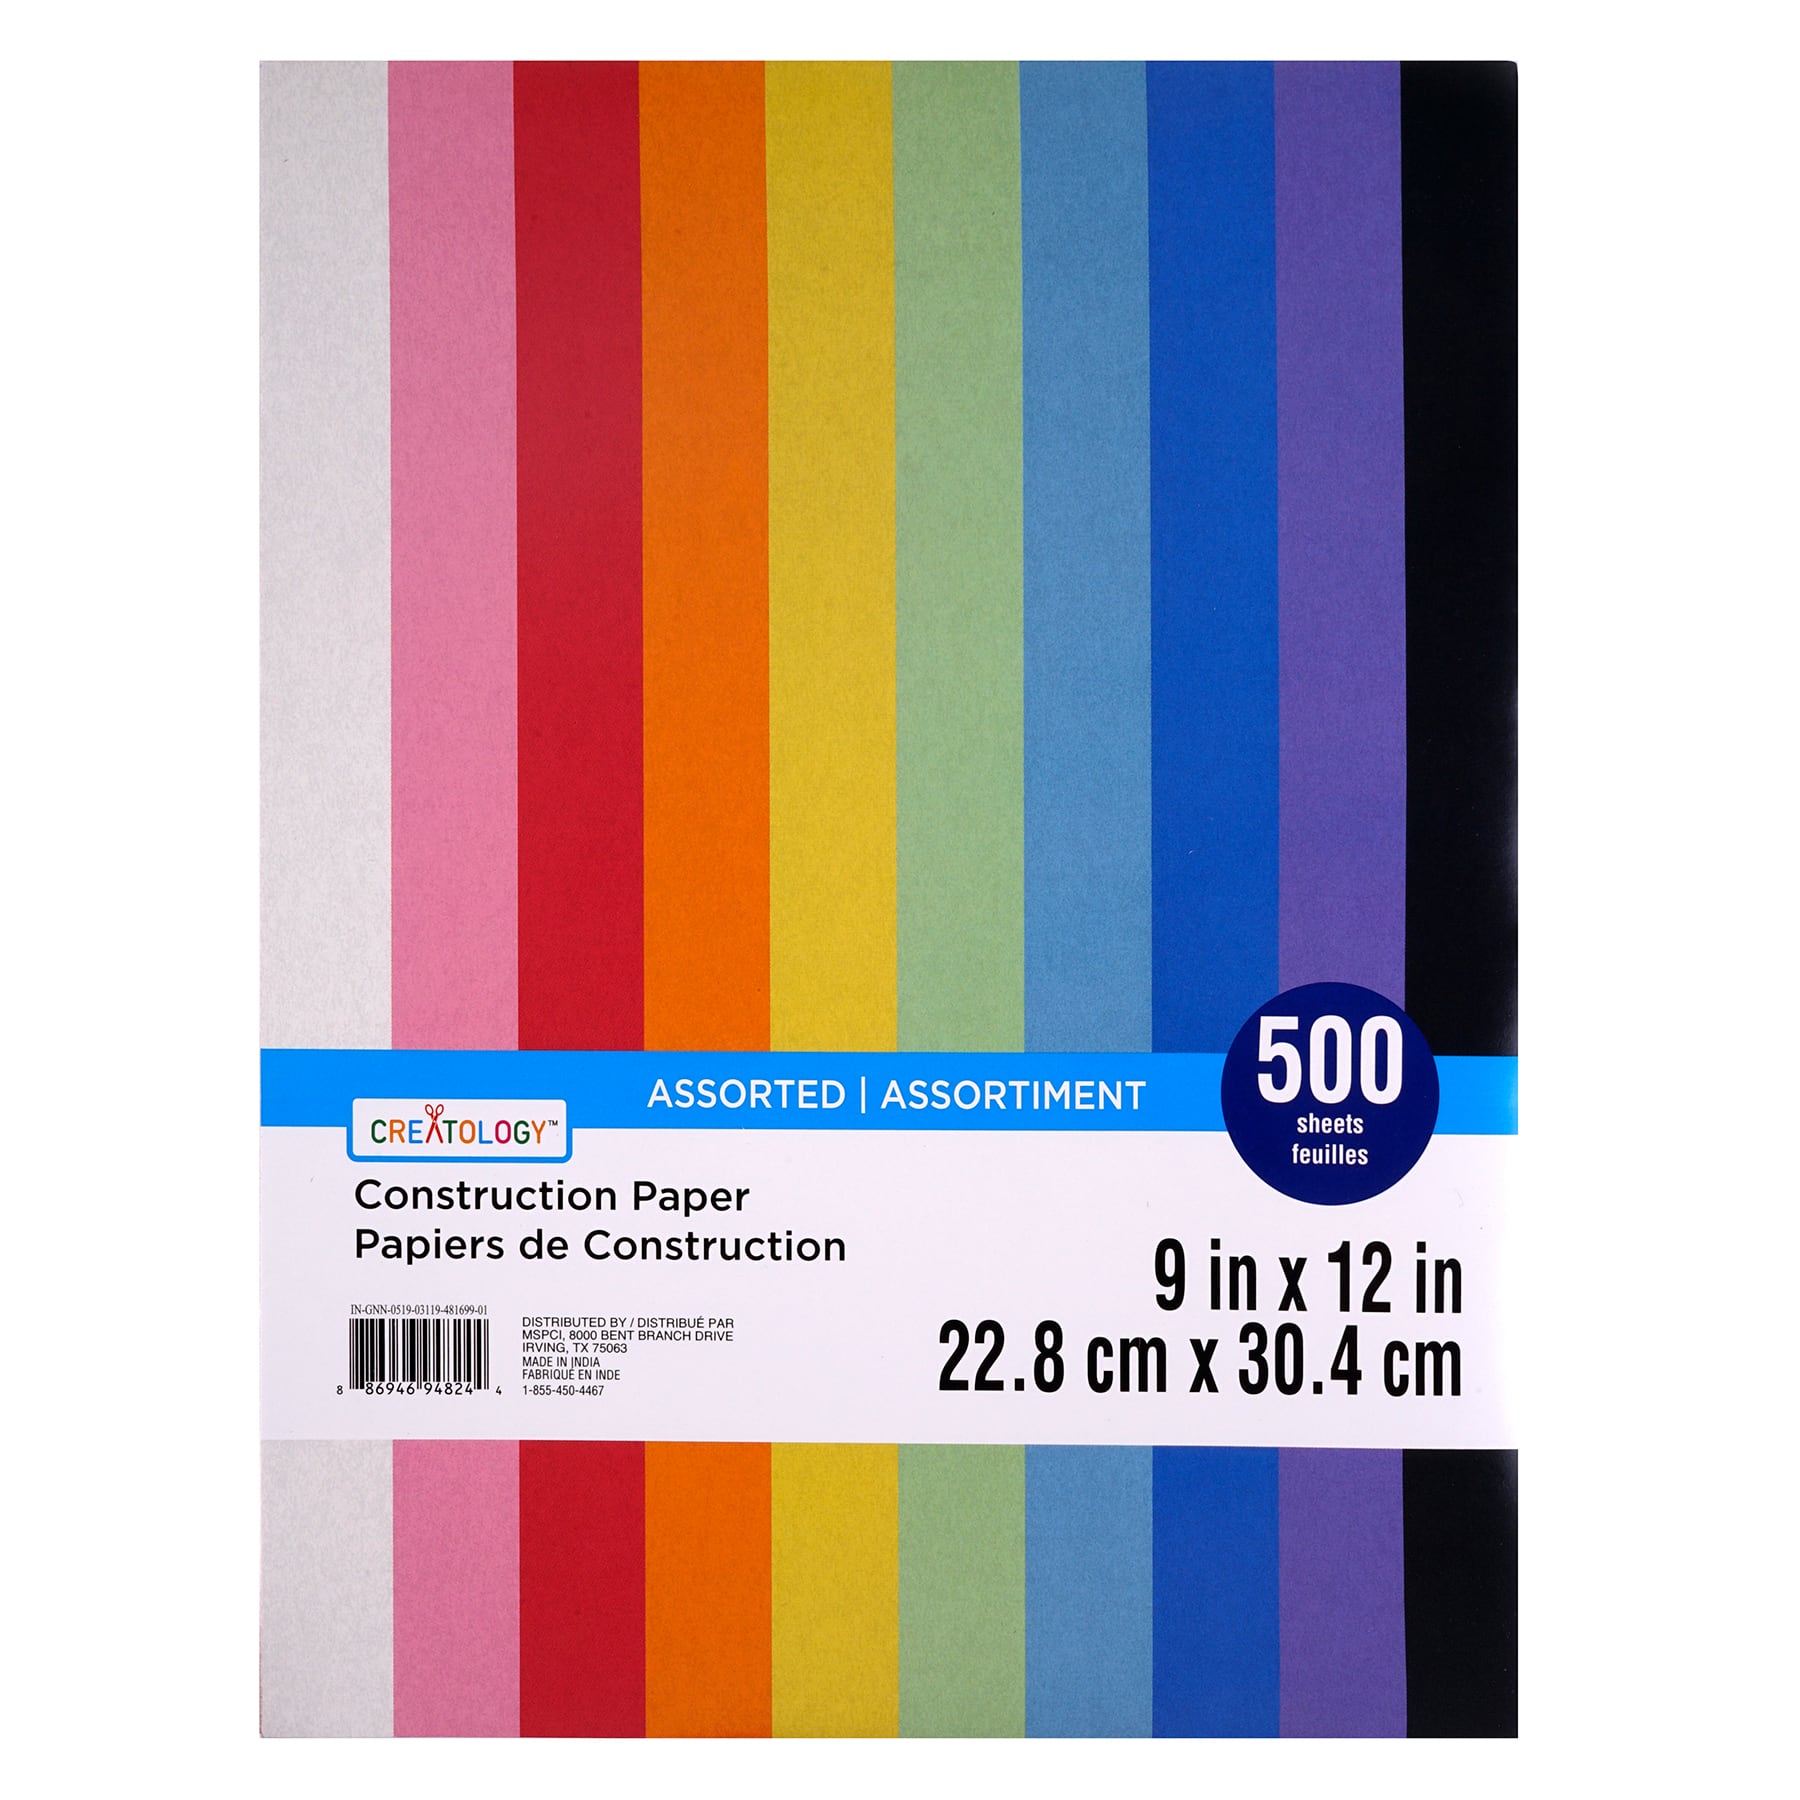 12 Packs: 50 ct. (600 total) 12 x 18 White Construction Paper by